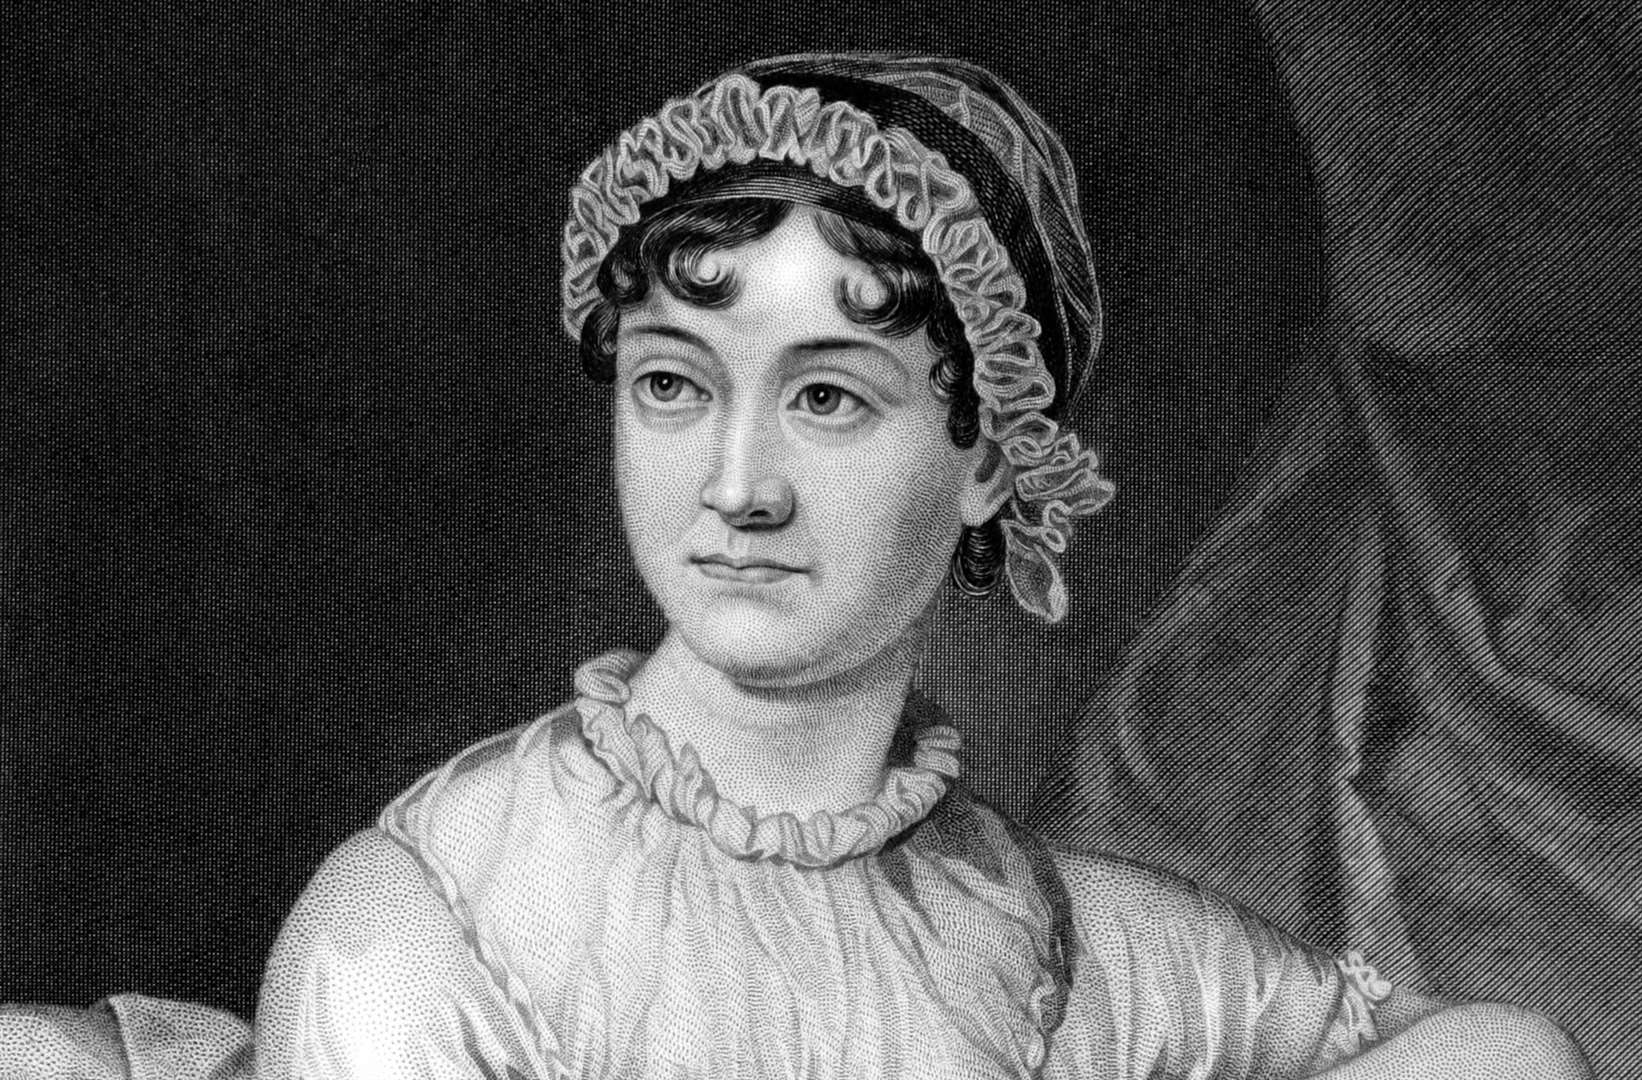 Jane Austen was a regular visitor to Kent – primarily to visit her brother Edward who lived in Godmersham